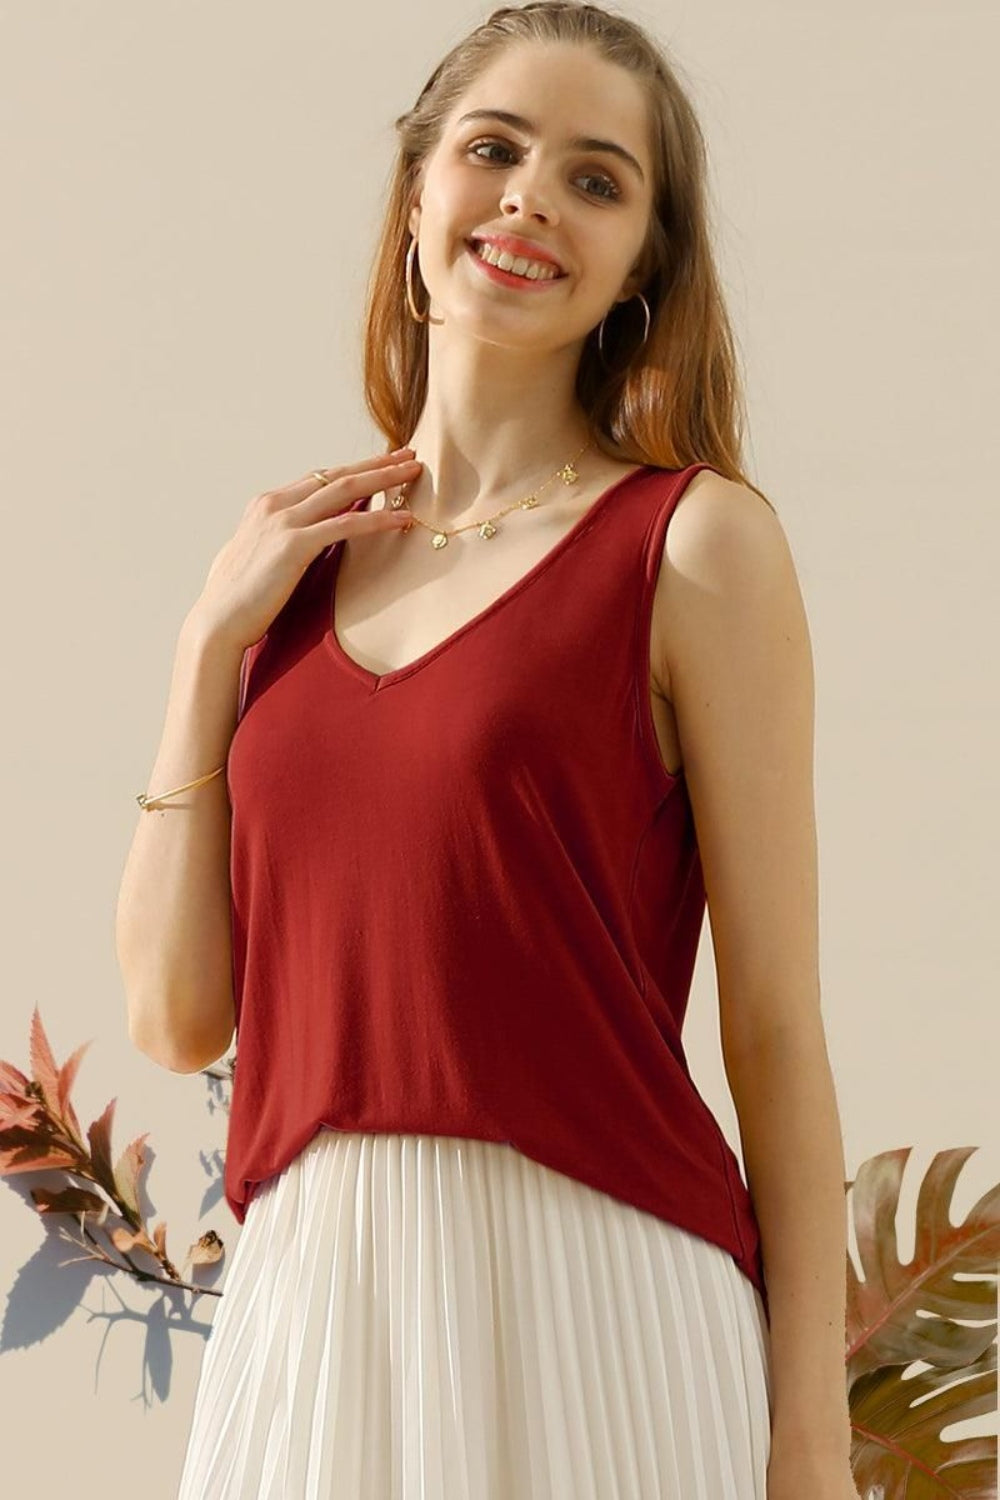 The V-Neck Curved Hem Tank is a stylish and versatile piece. With its flattering neckline and curved hem, it adds a touch of femininity to any outfit. The tank's relaxed fit provides comfort without sacrificing style. S - XL